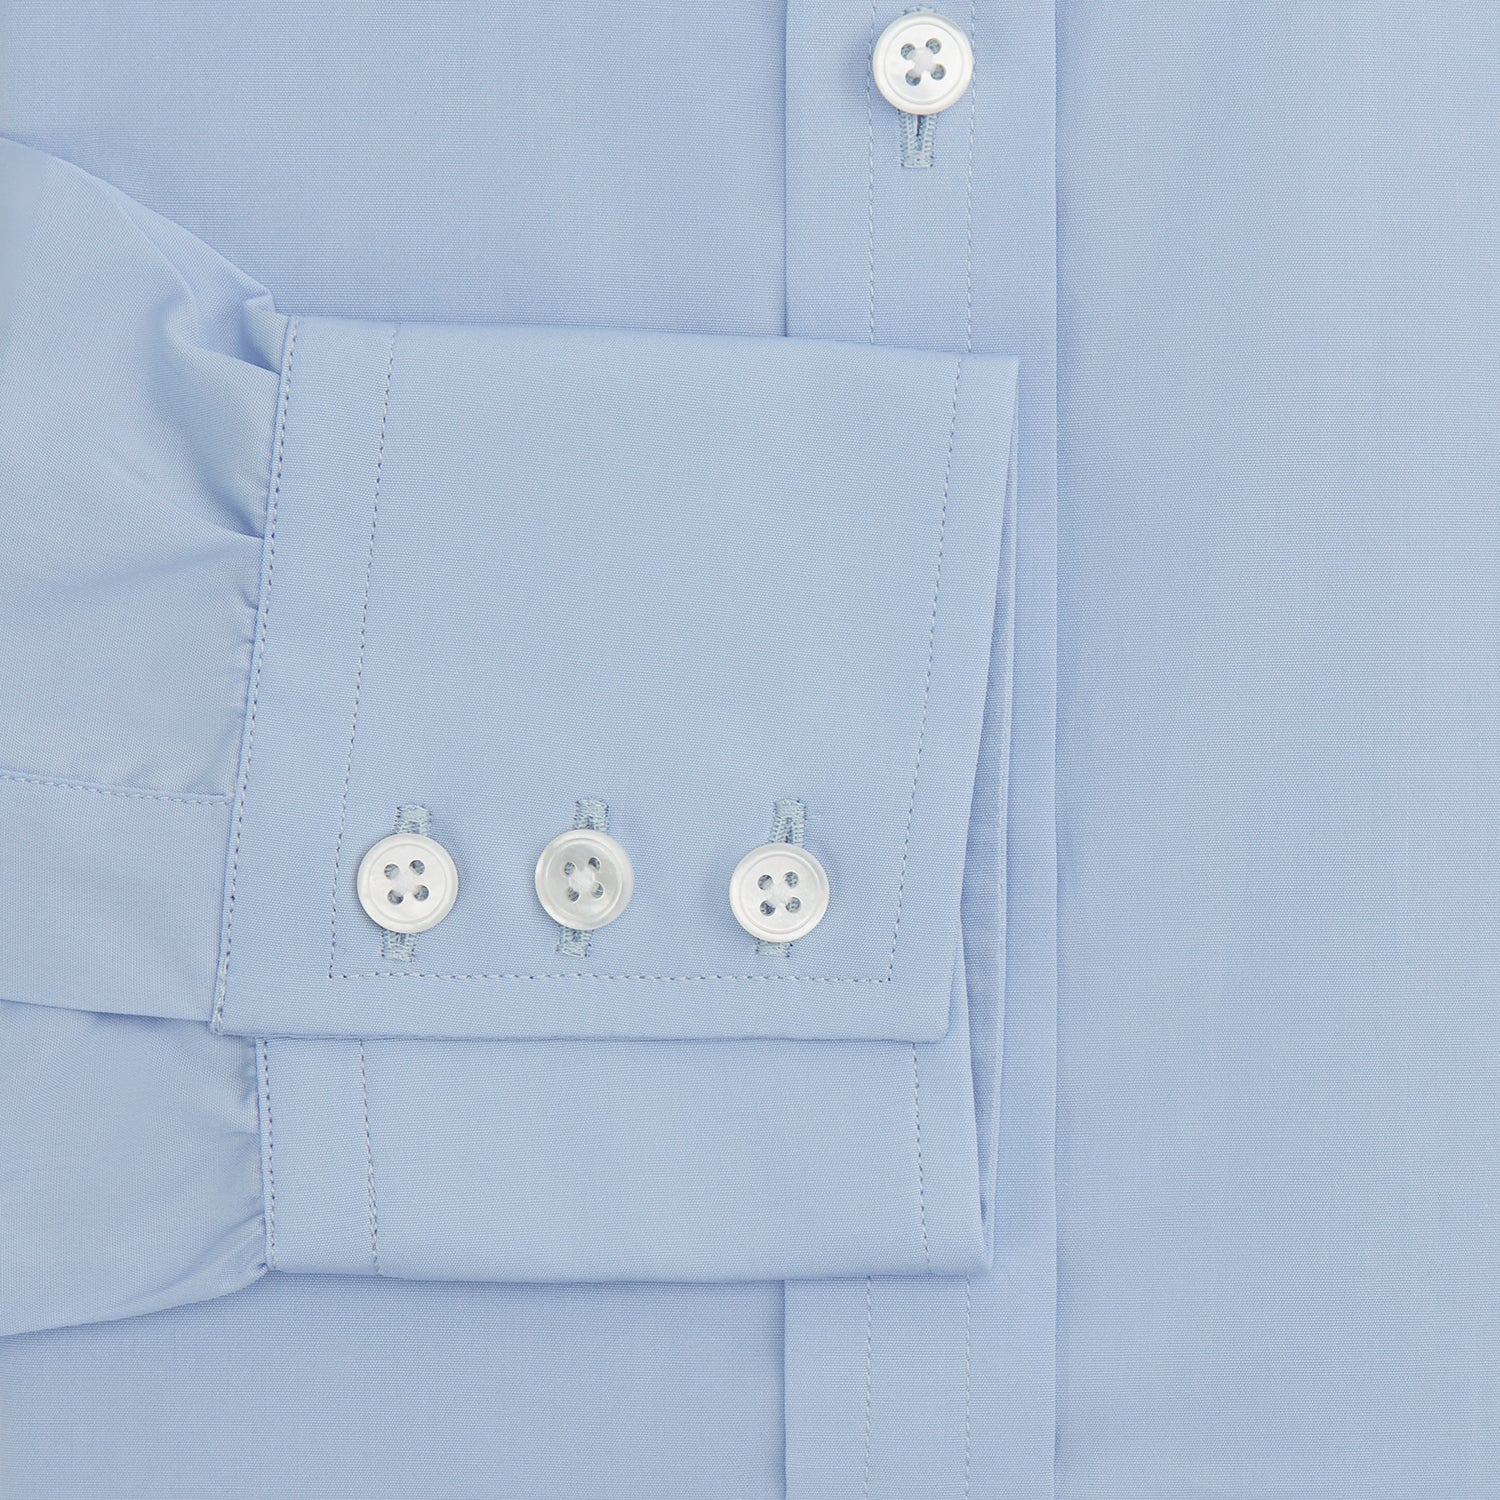 Blue Cotton Shirt with T&A Collar and 3-Button Cuffs